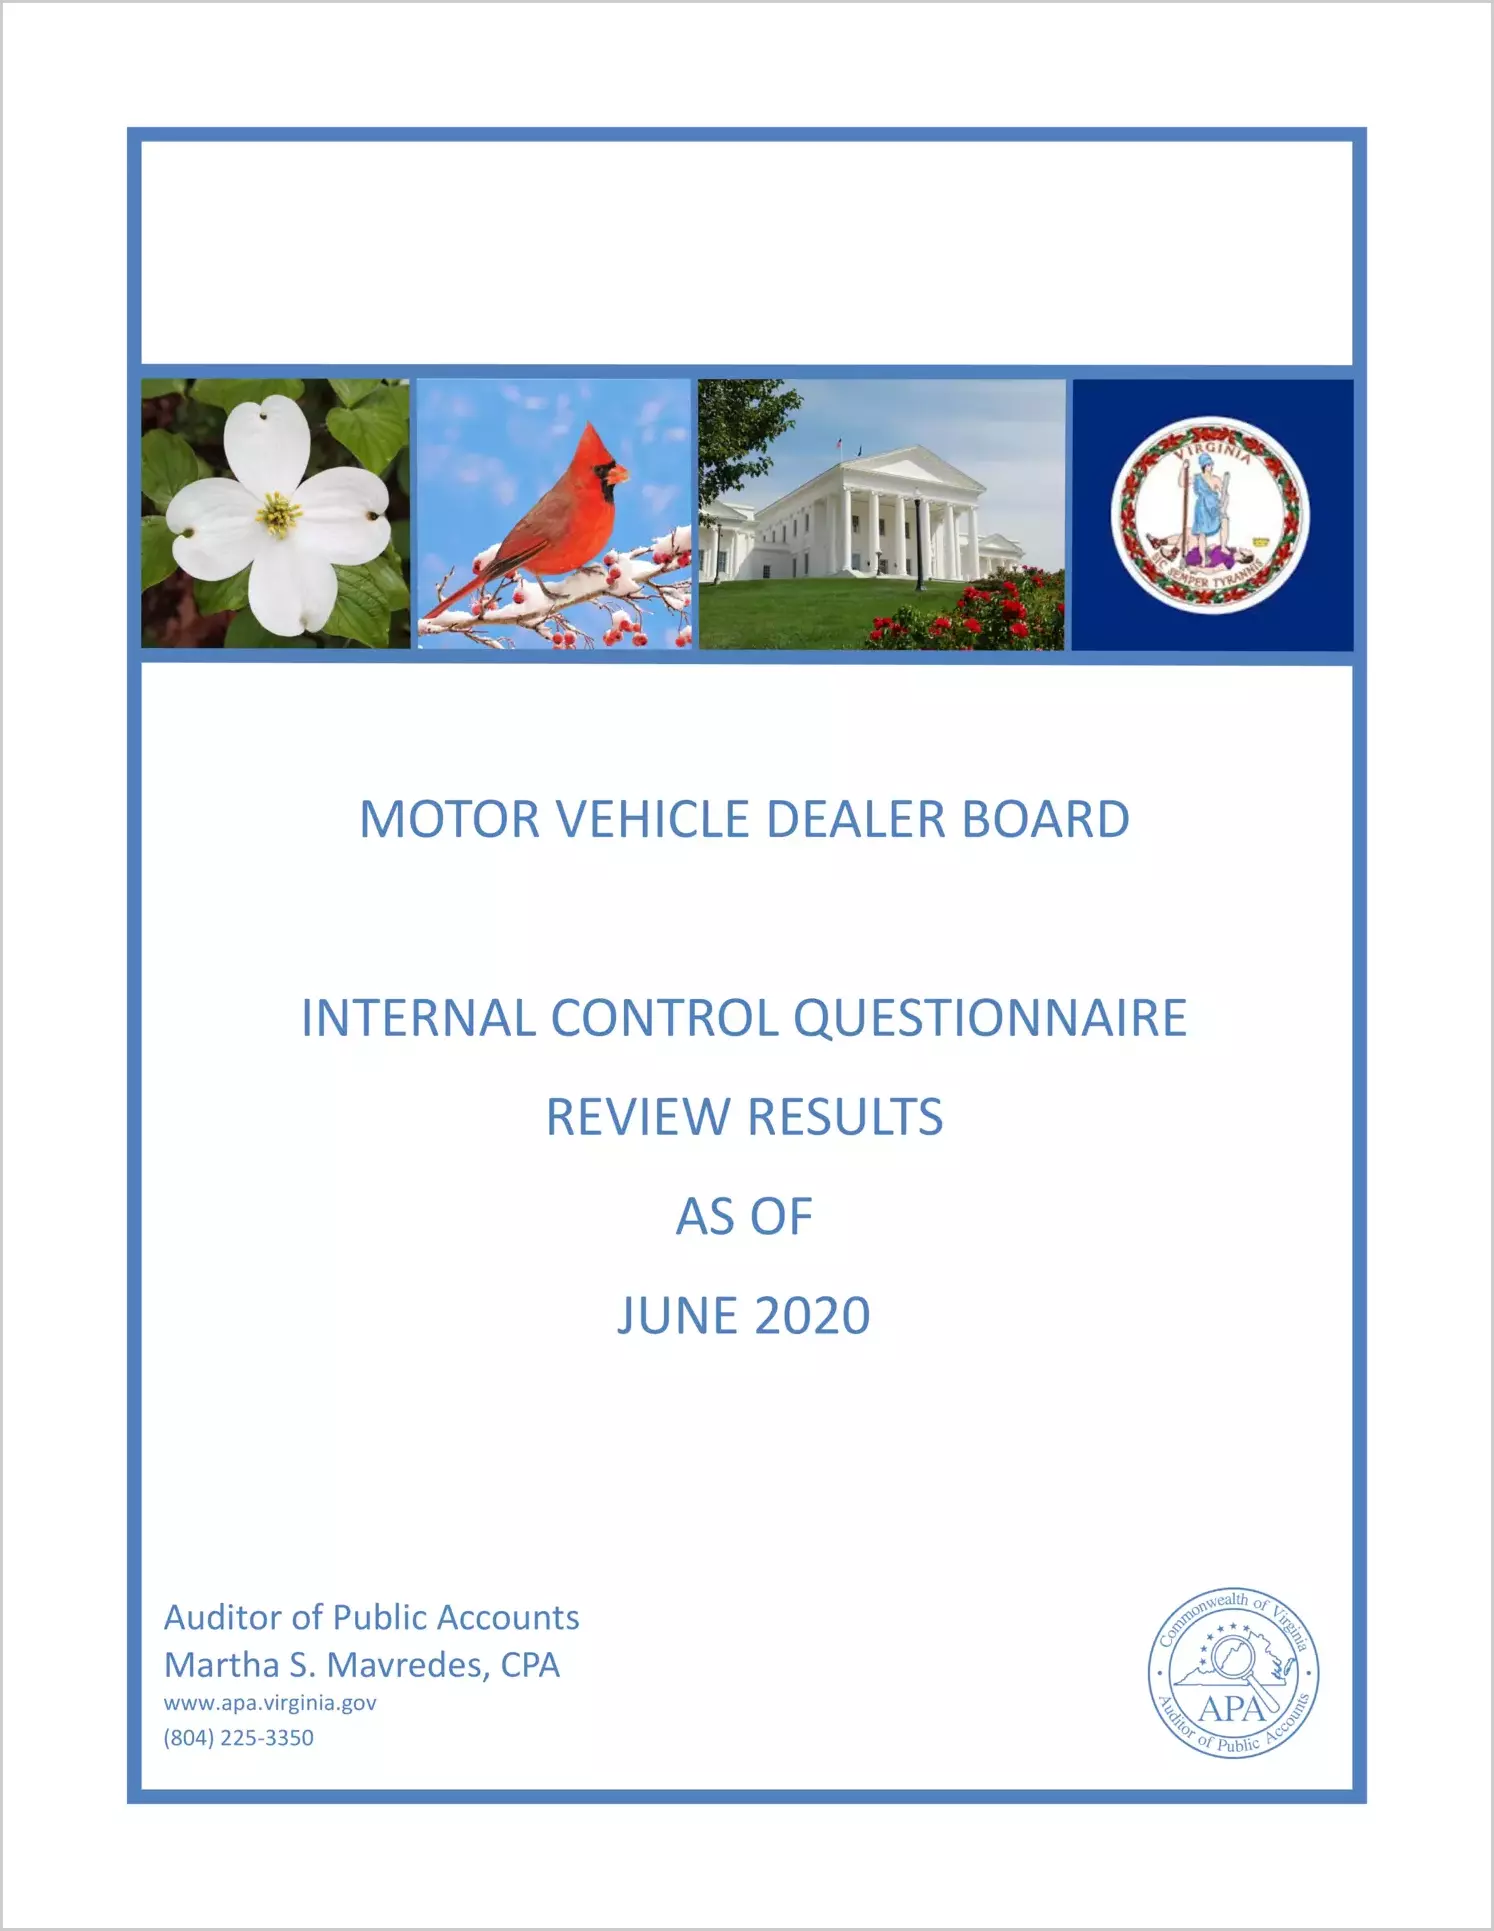 Motor Vehicle Dealer Board Internal Control Questionnaire Review Results as of June 2020